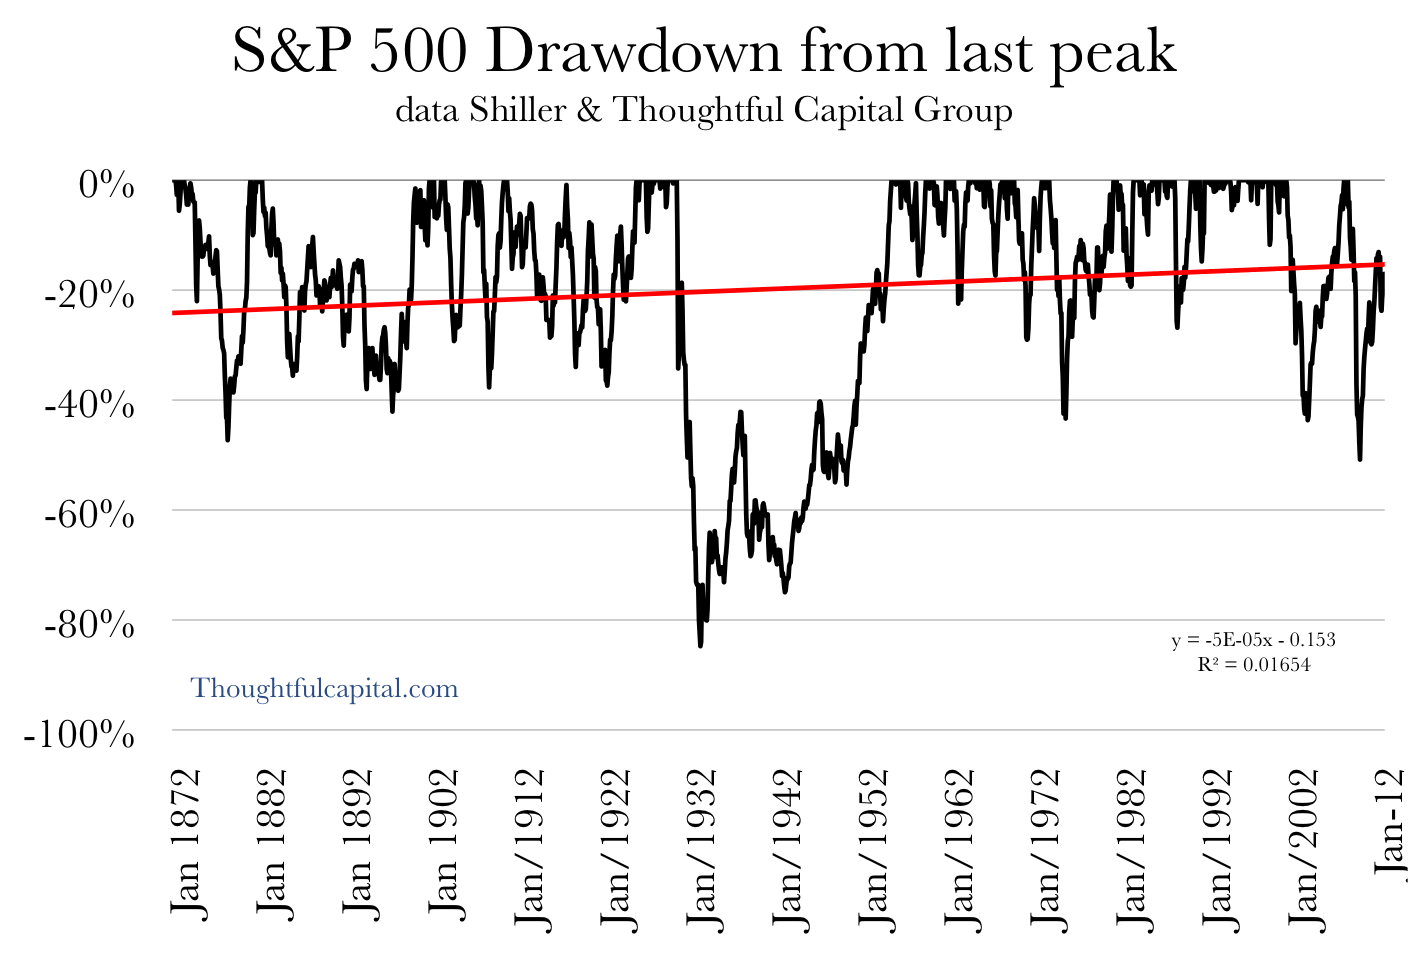 S&P 500 draw downs 1871-2011